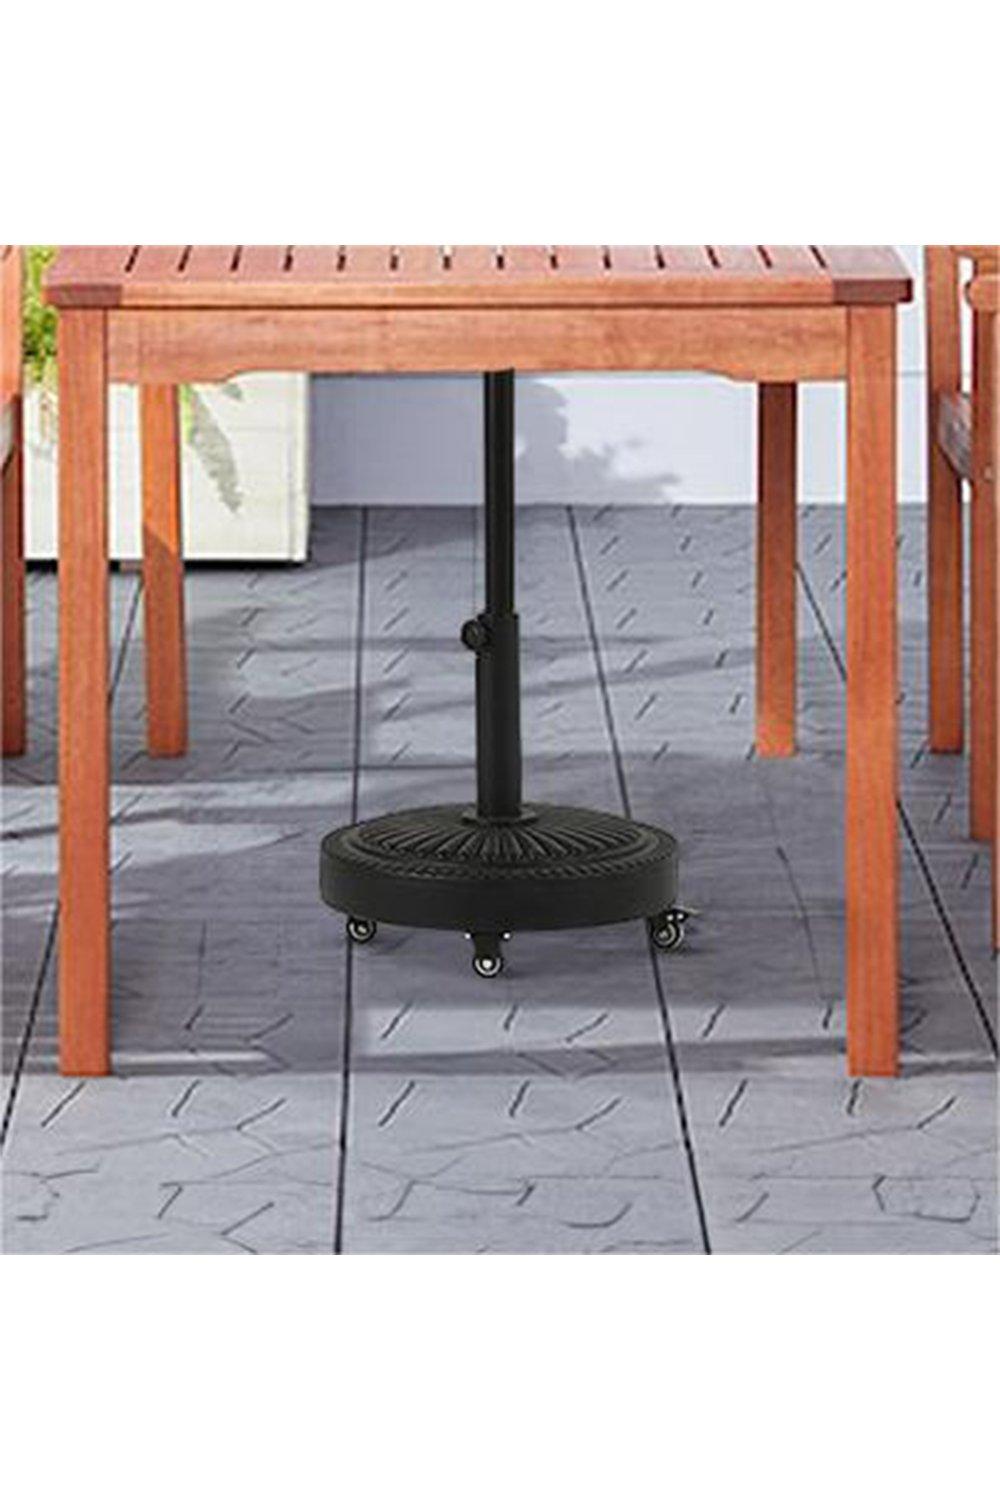 Round-Shaped Concrete-Filled Patio Parasol Stand with Wheels